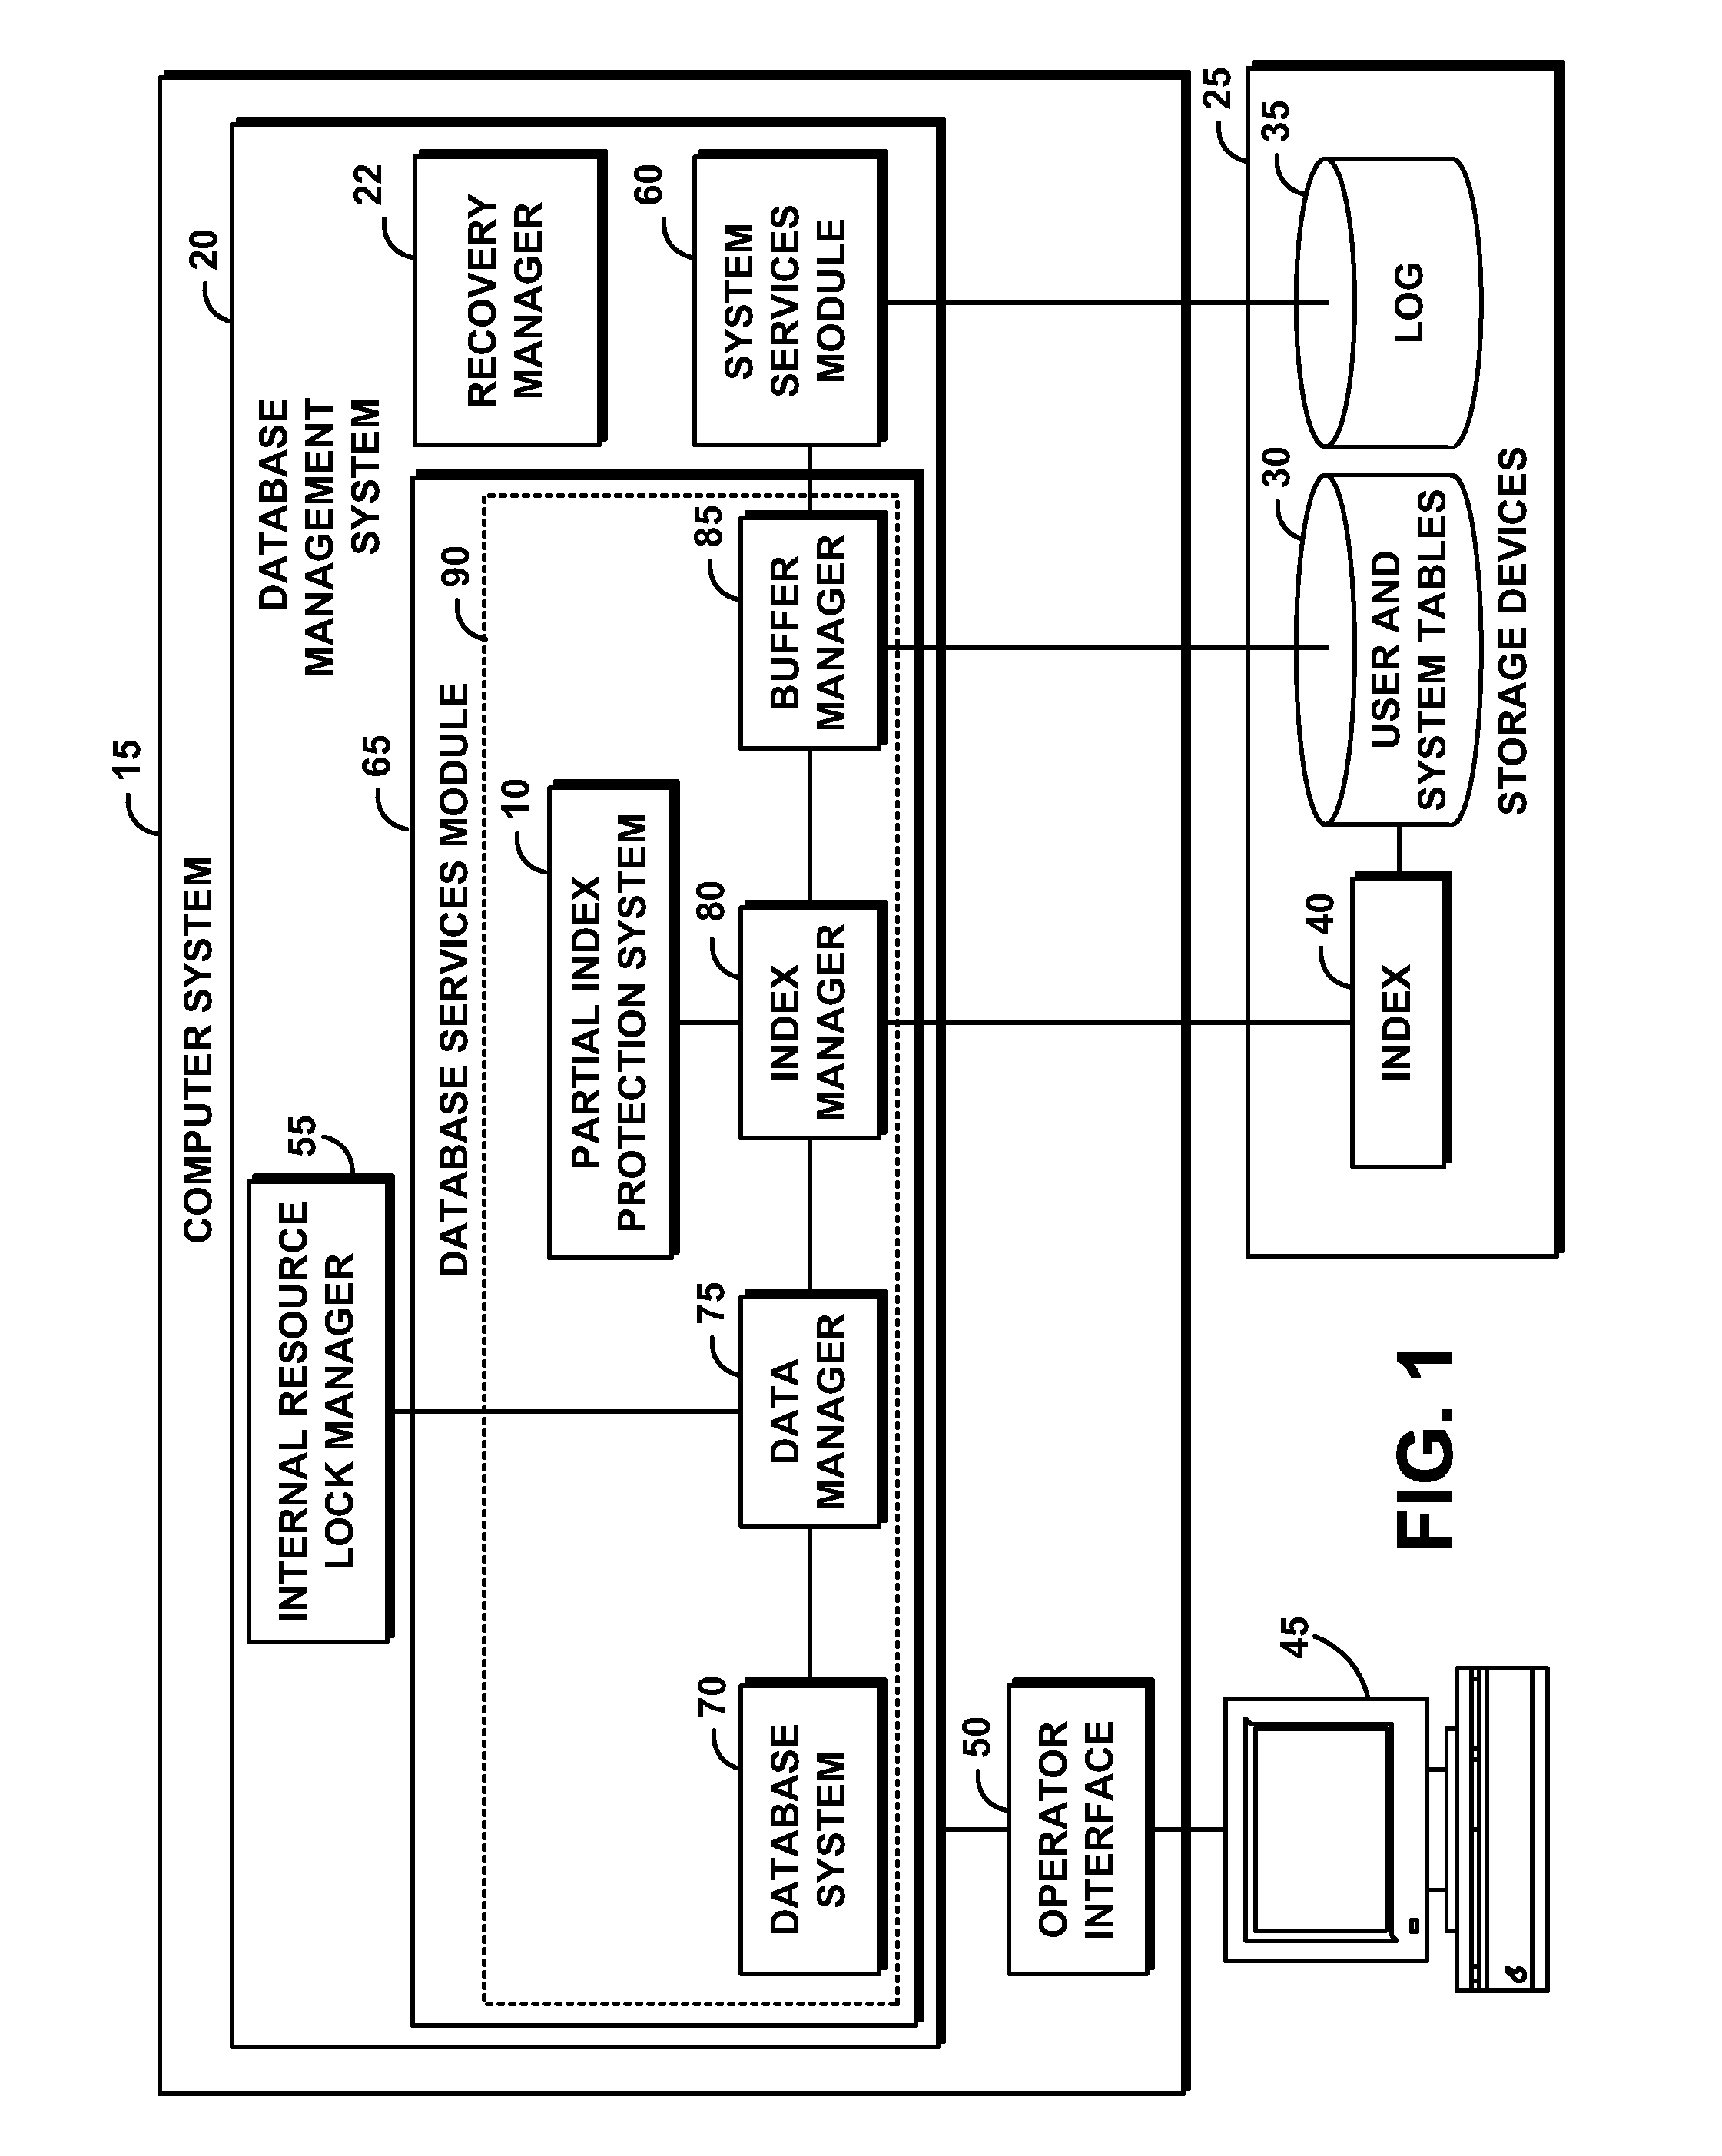 System and Method for Increasing Availability of an Index